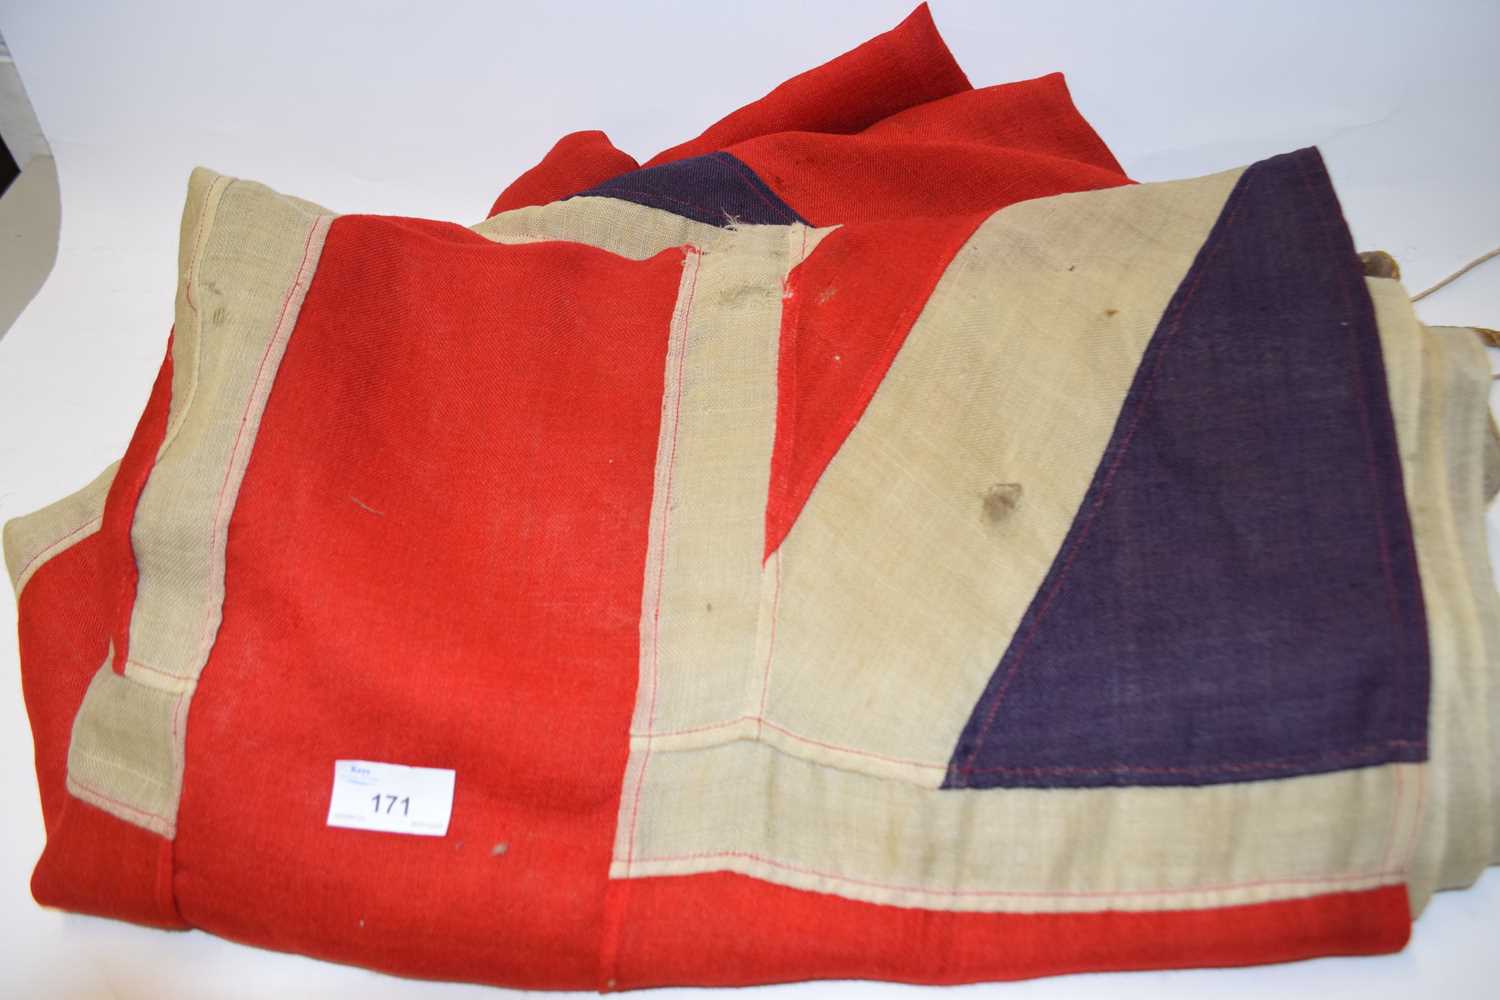 Lot 171 - Vintage Naval white ensign flag - worn and...